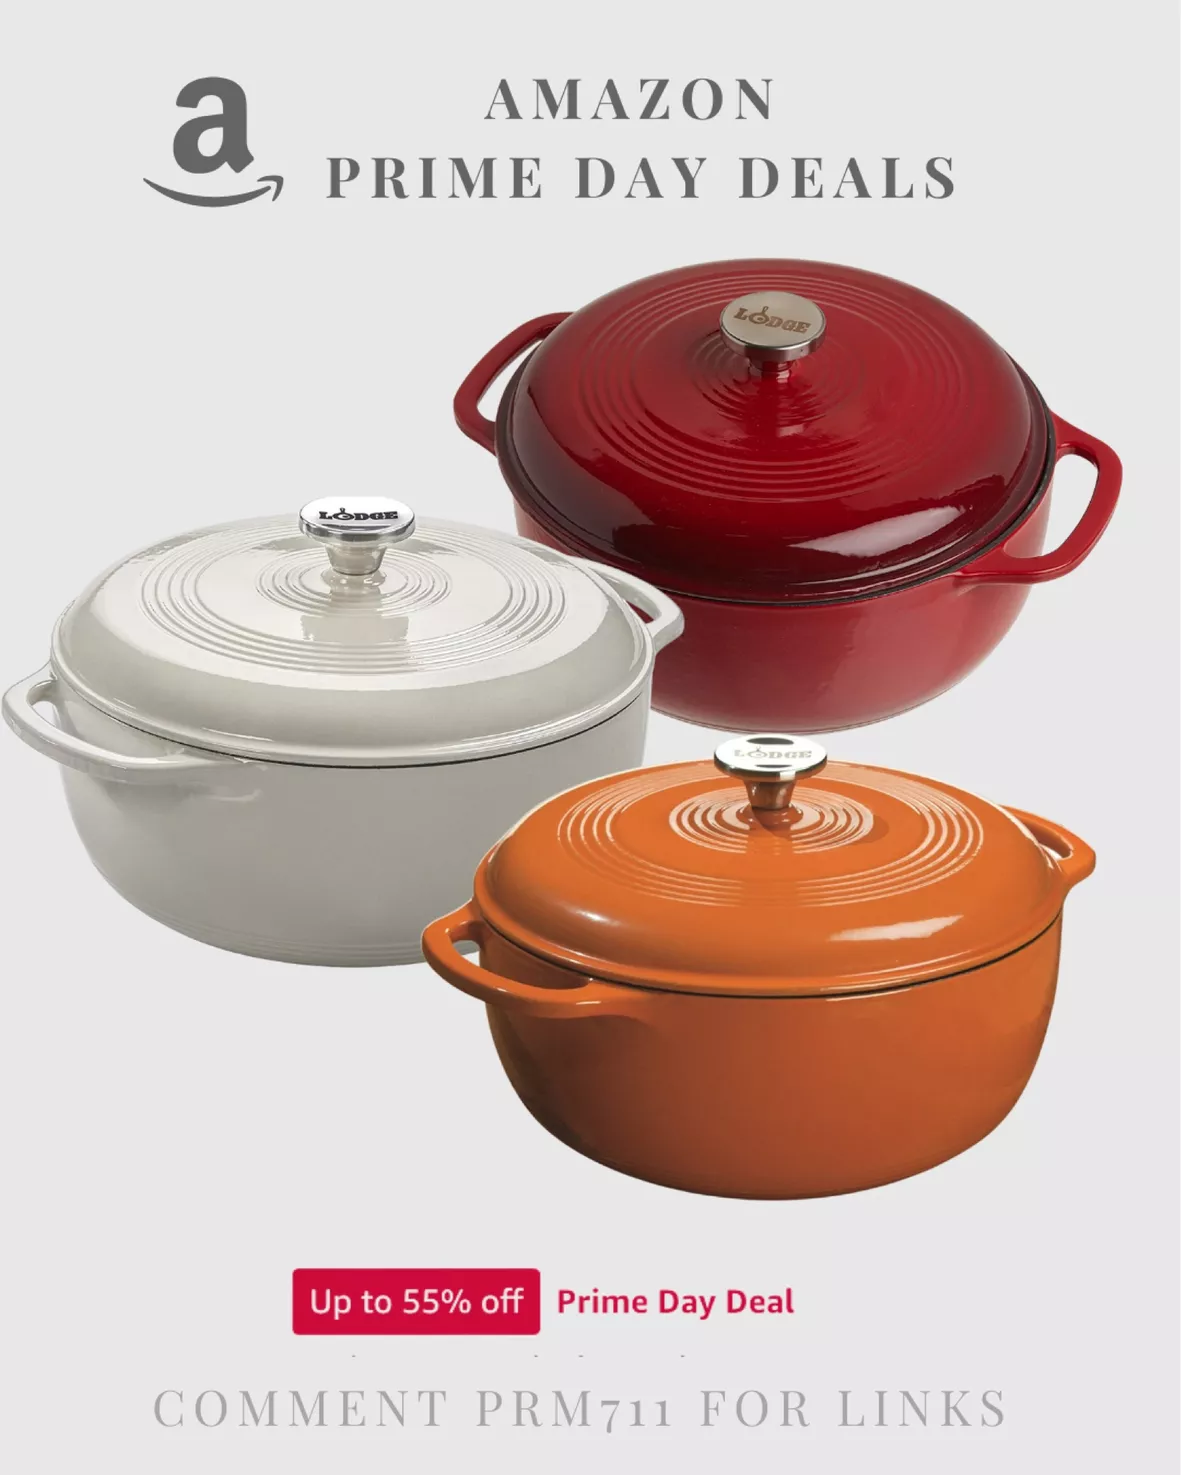 CAROTE 6Qt Enamel Cast Iron Dutch Oven Pot With Lid, Oven Safe Up to 5